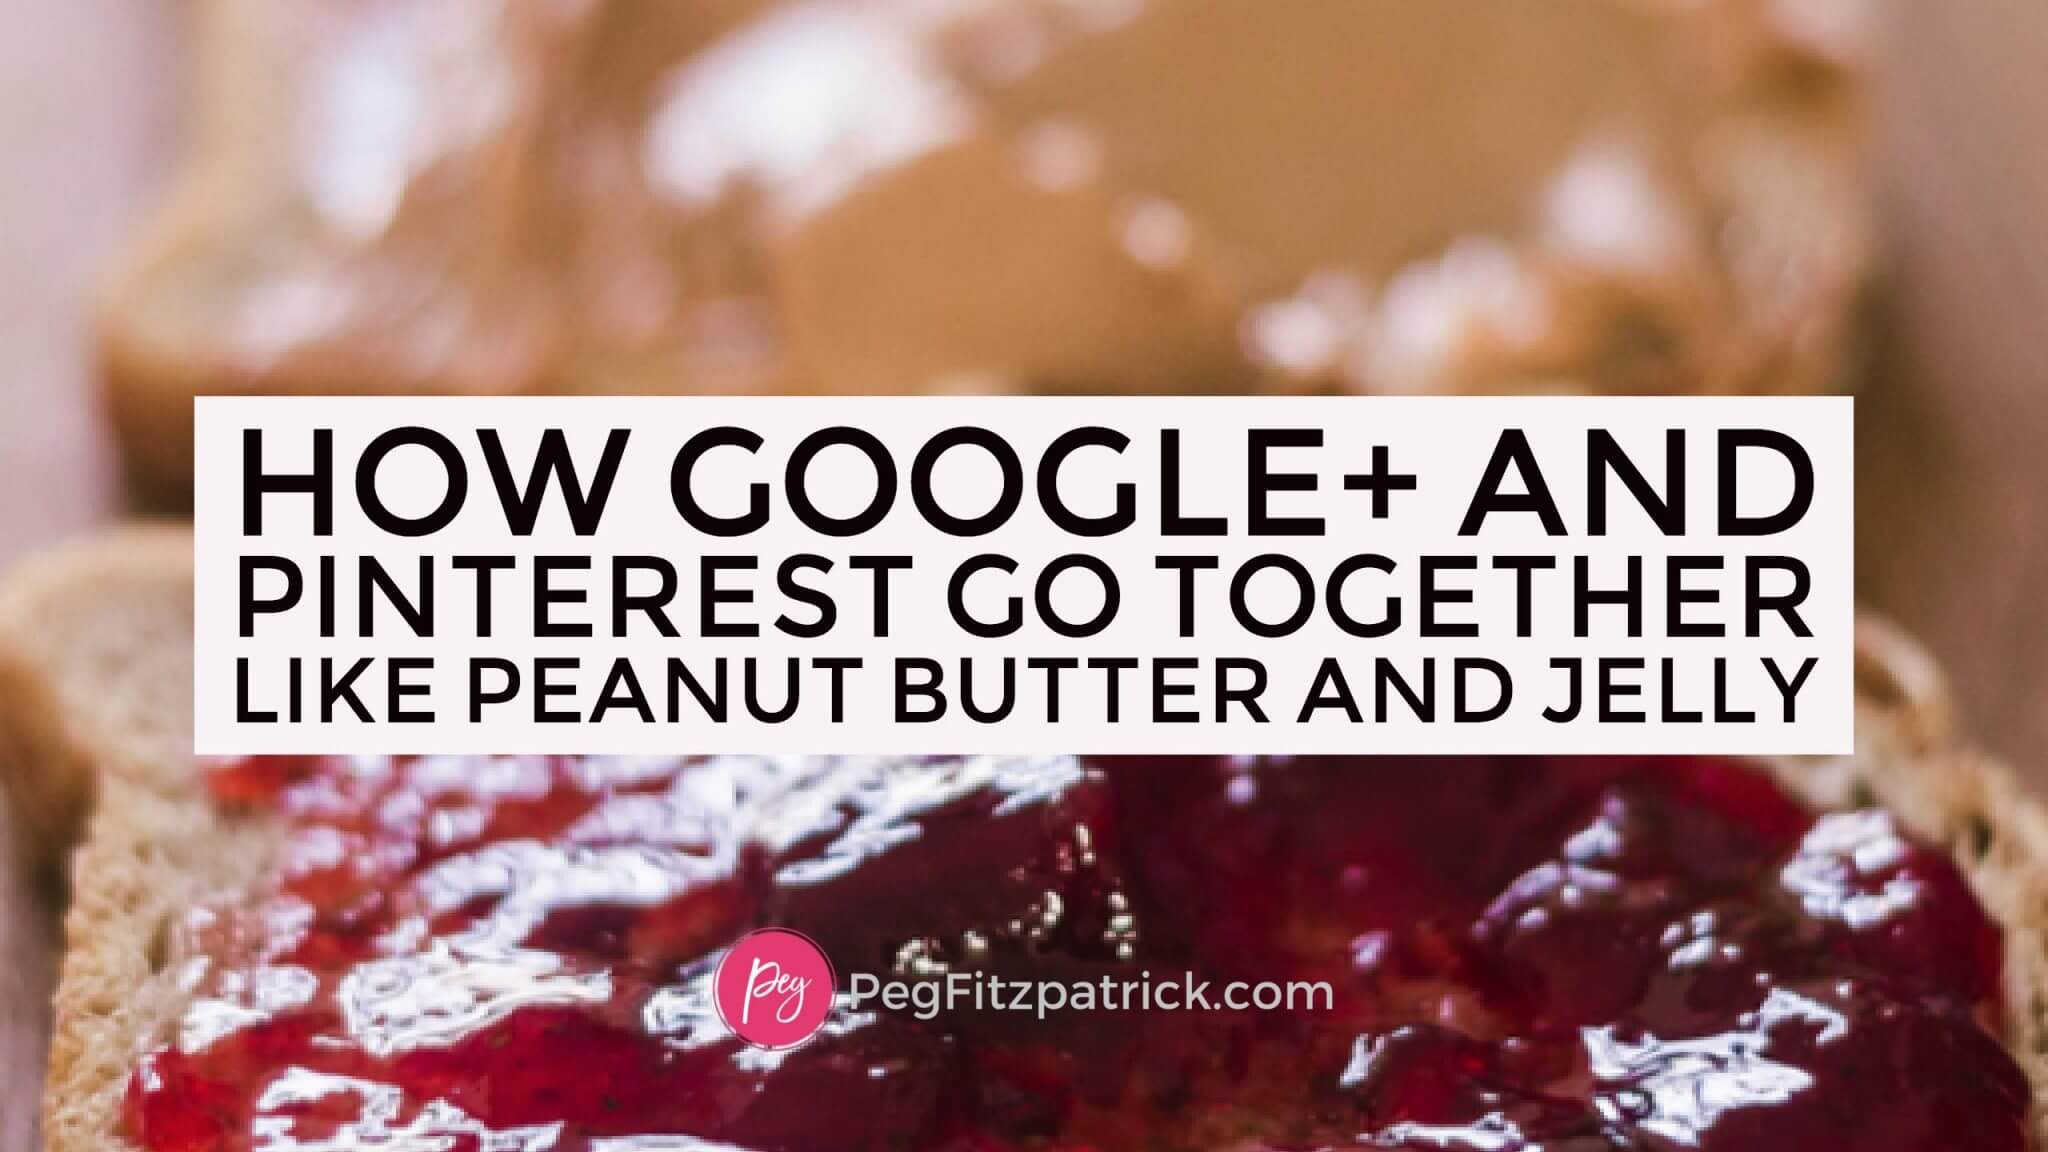 How Google+ and Pinterest Go Together Like Peanut Butter and Jelly